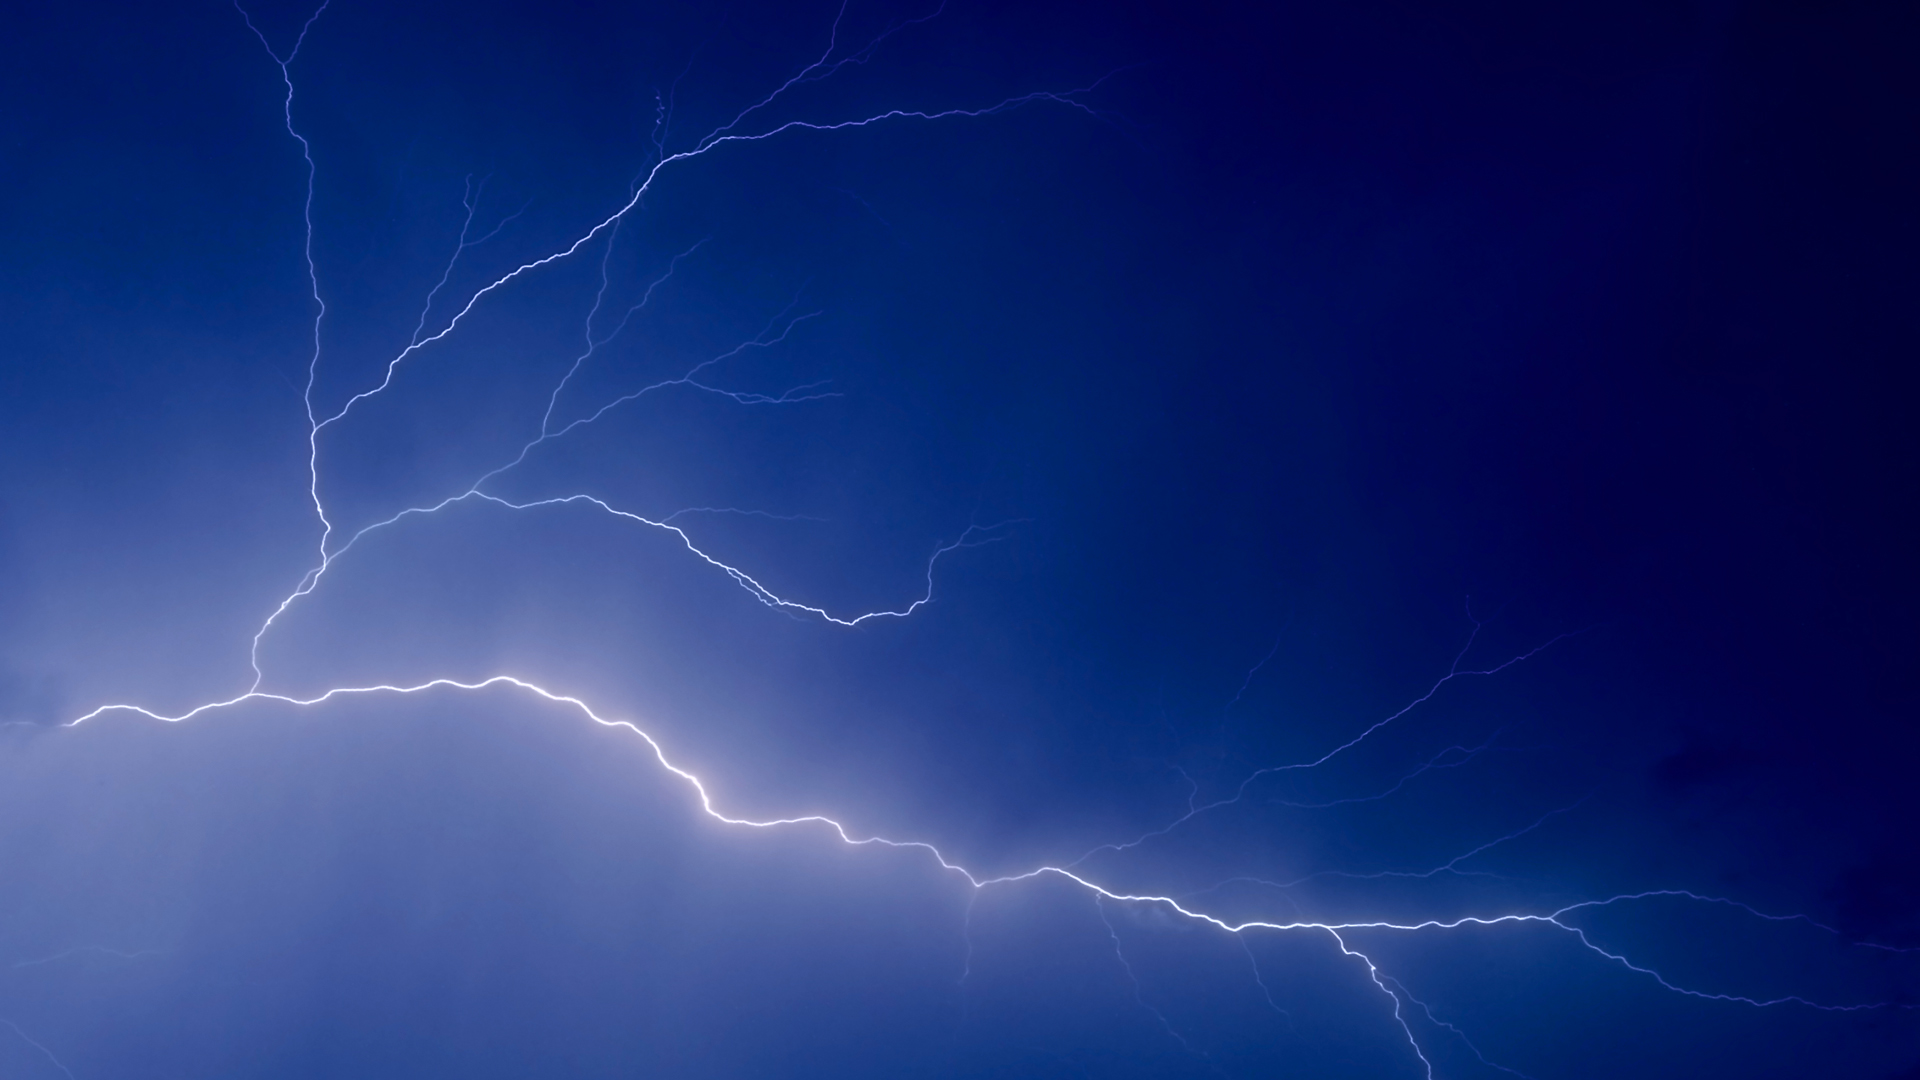 Wallpaper Cool Lightning Pictures Streaks Ps3